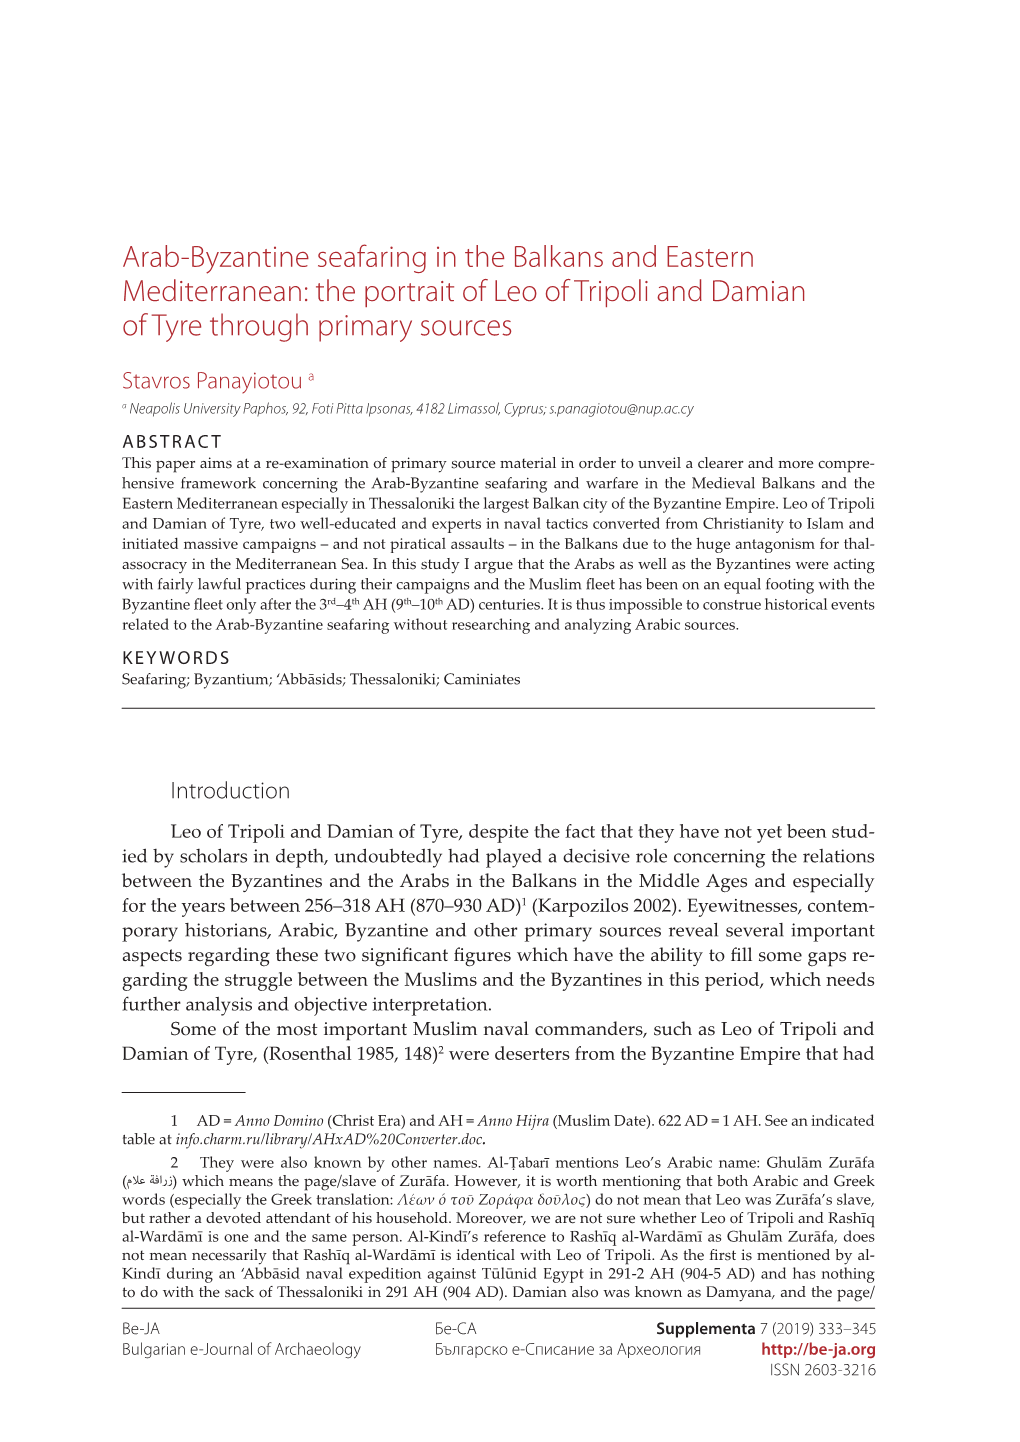 Arab-Byzantine Seafaring in the Balkans and Eastern Mediterranean: the Portrait of Leo of Tripoli and Damian of Tyre Through Primary Sources